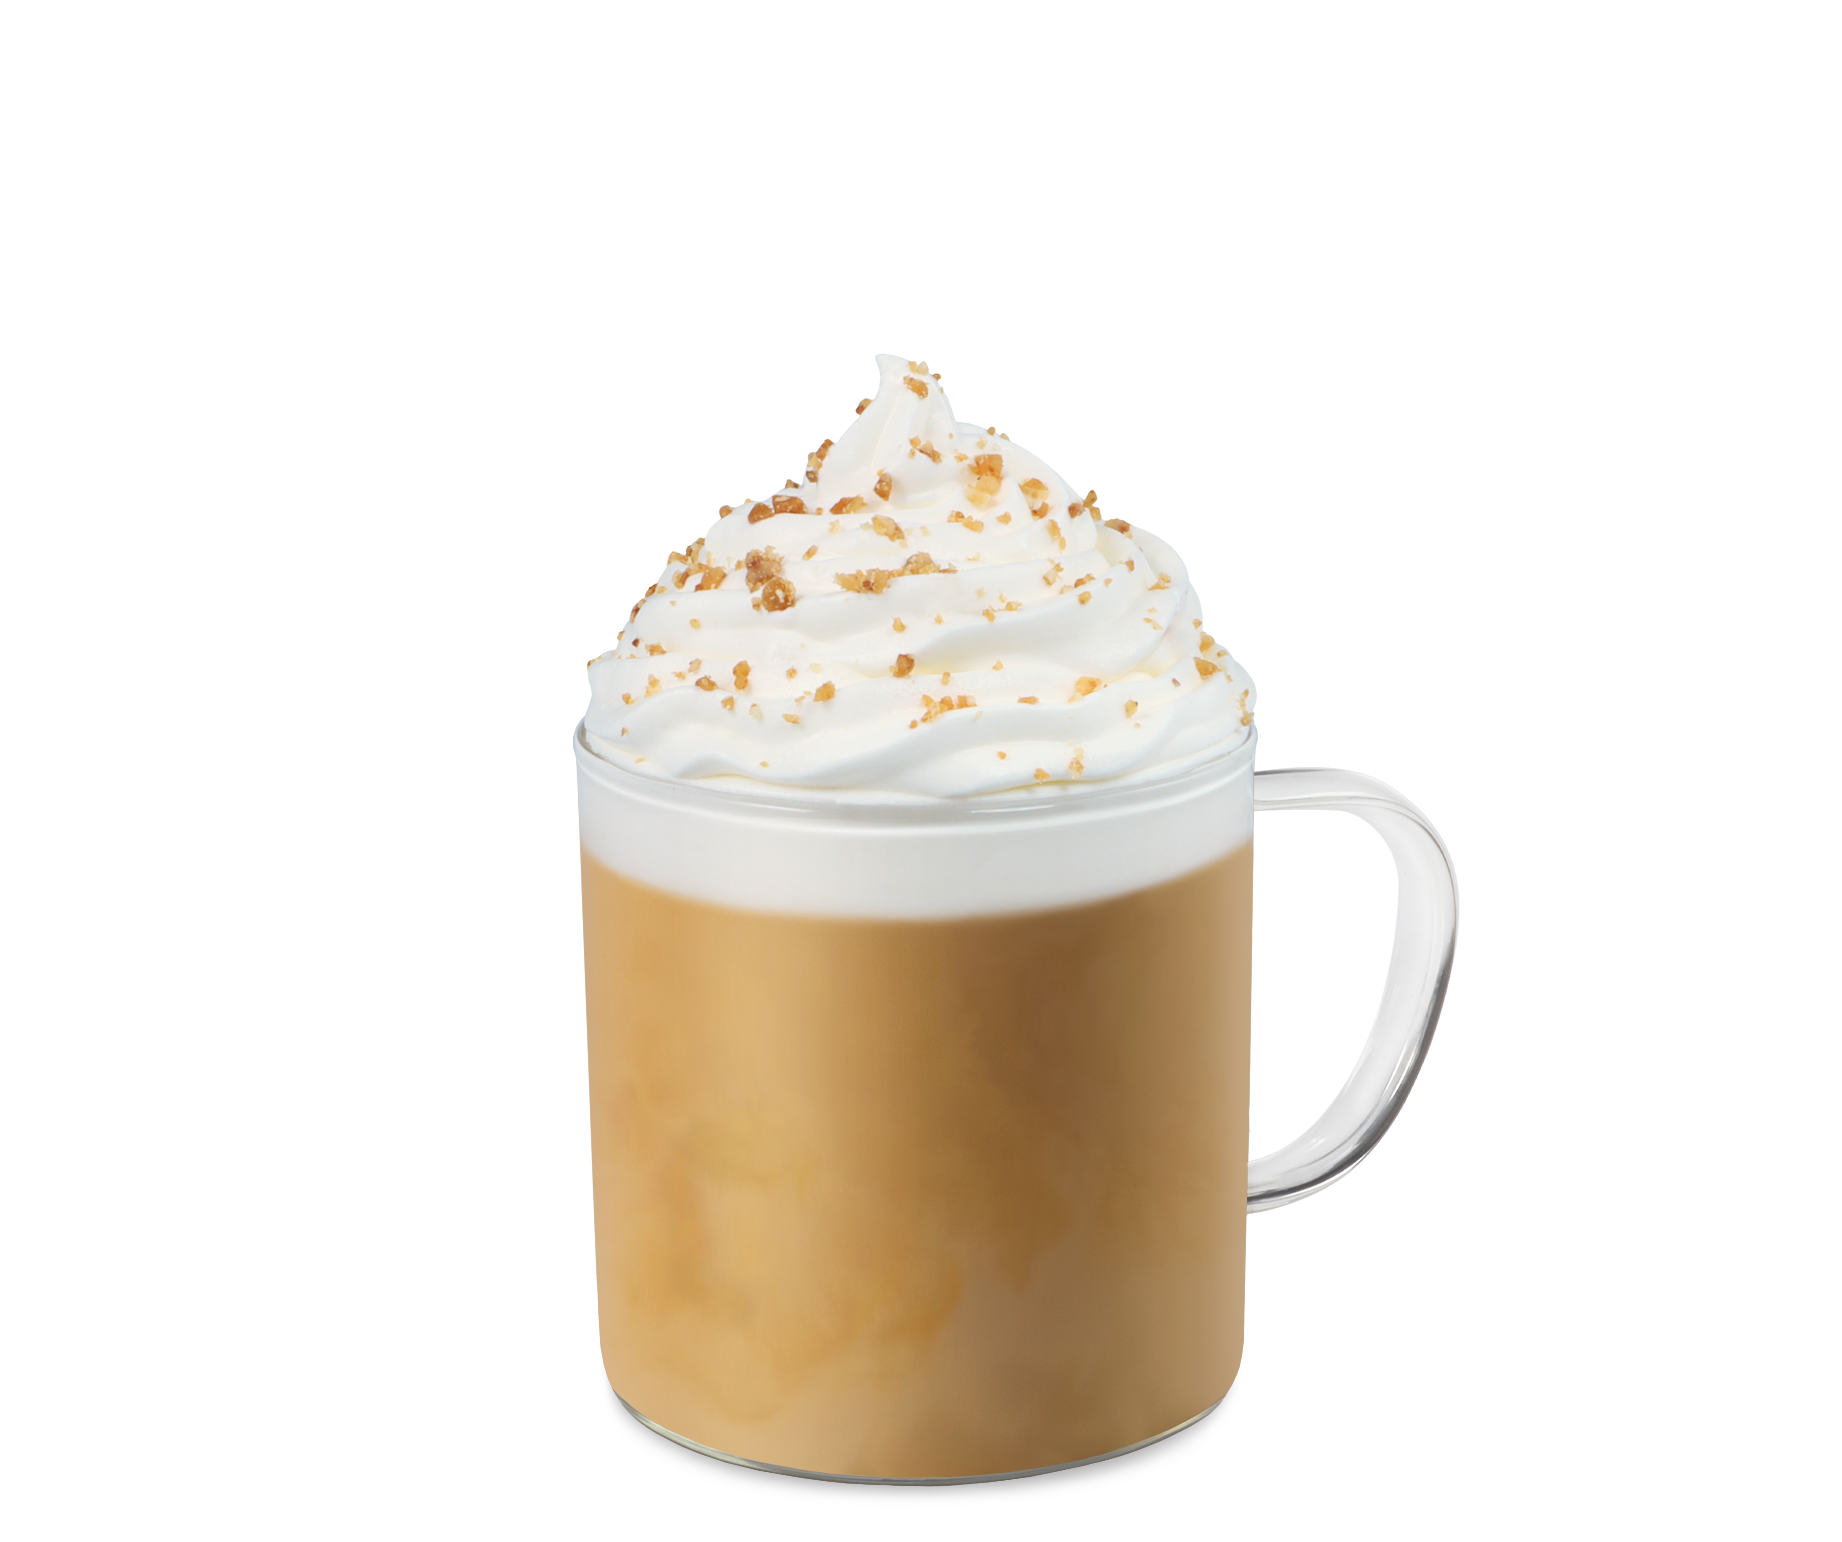 Toffee Nut Latte Coffee Cup